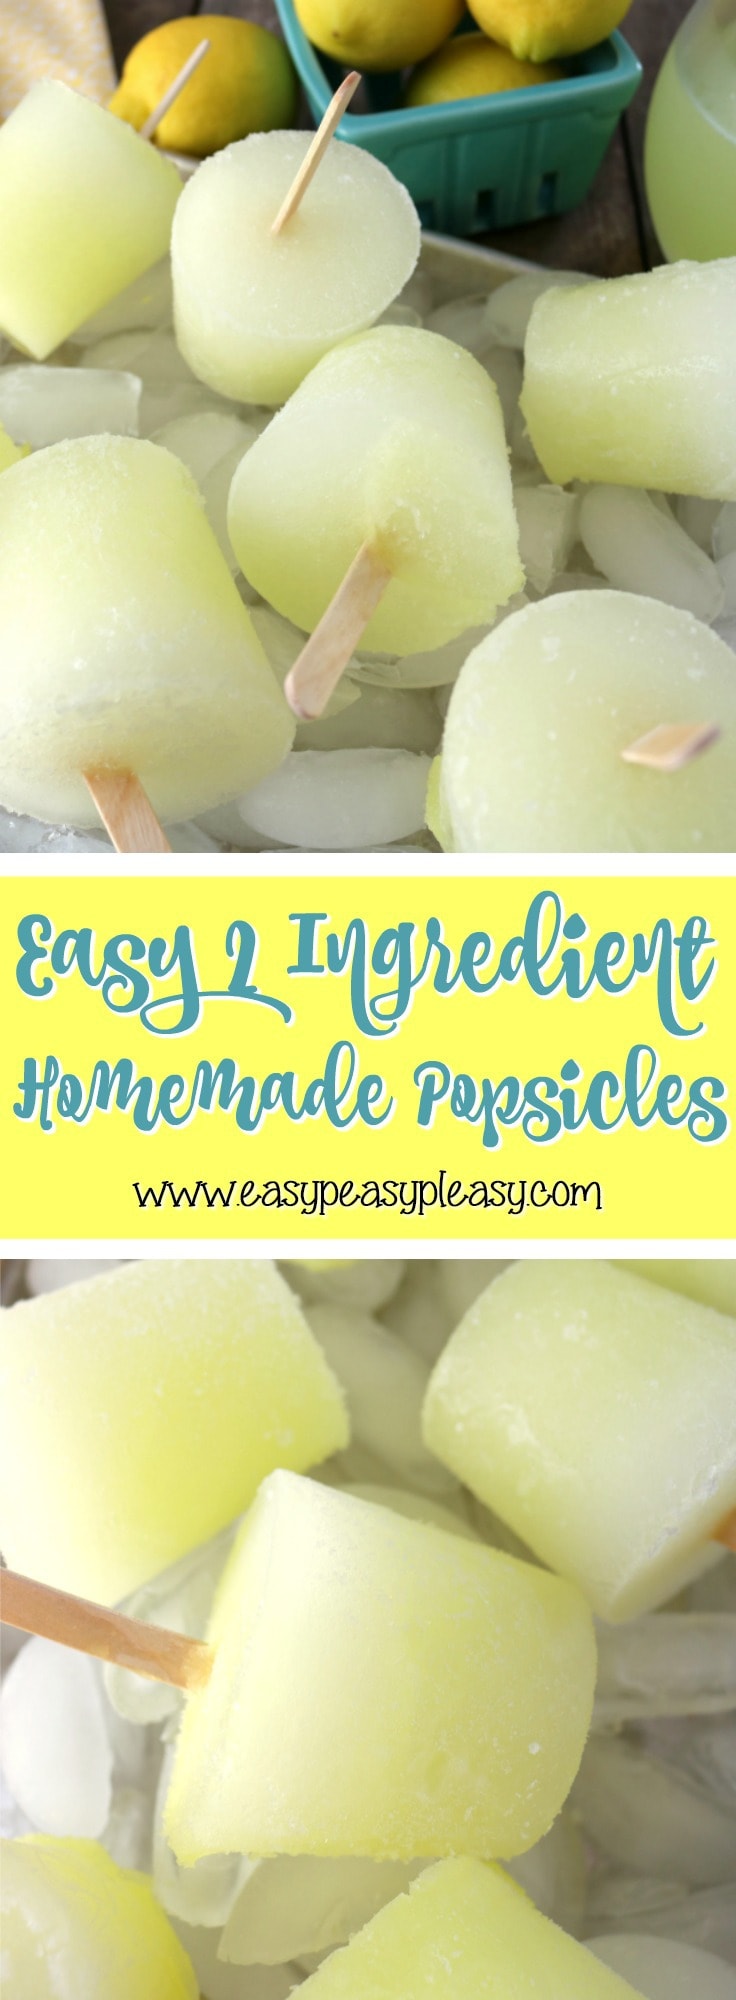 Making popsicles at home has never been easier. Grab a few items and a couple ingredients to make these super refreshing lemonade popsicles. Come check out my easy step by step instructions.